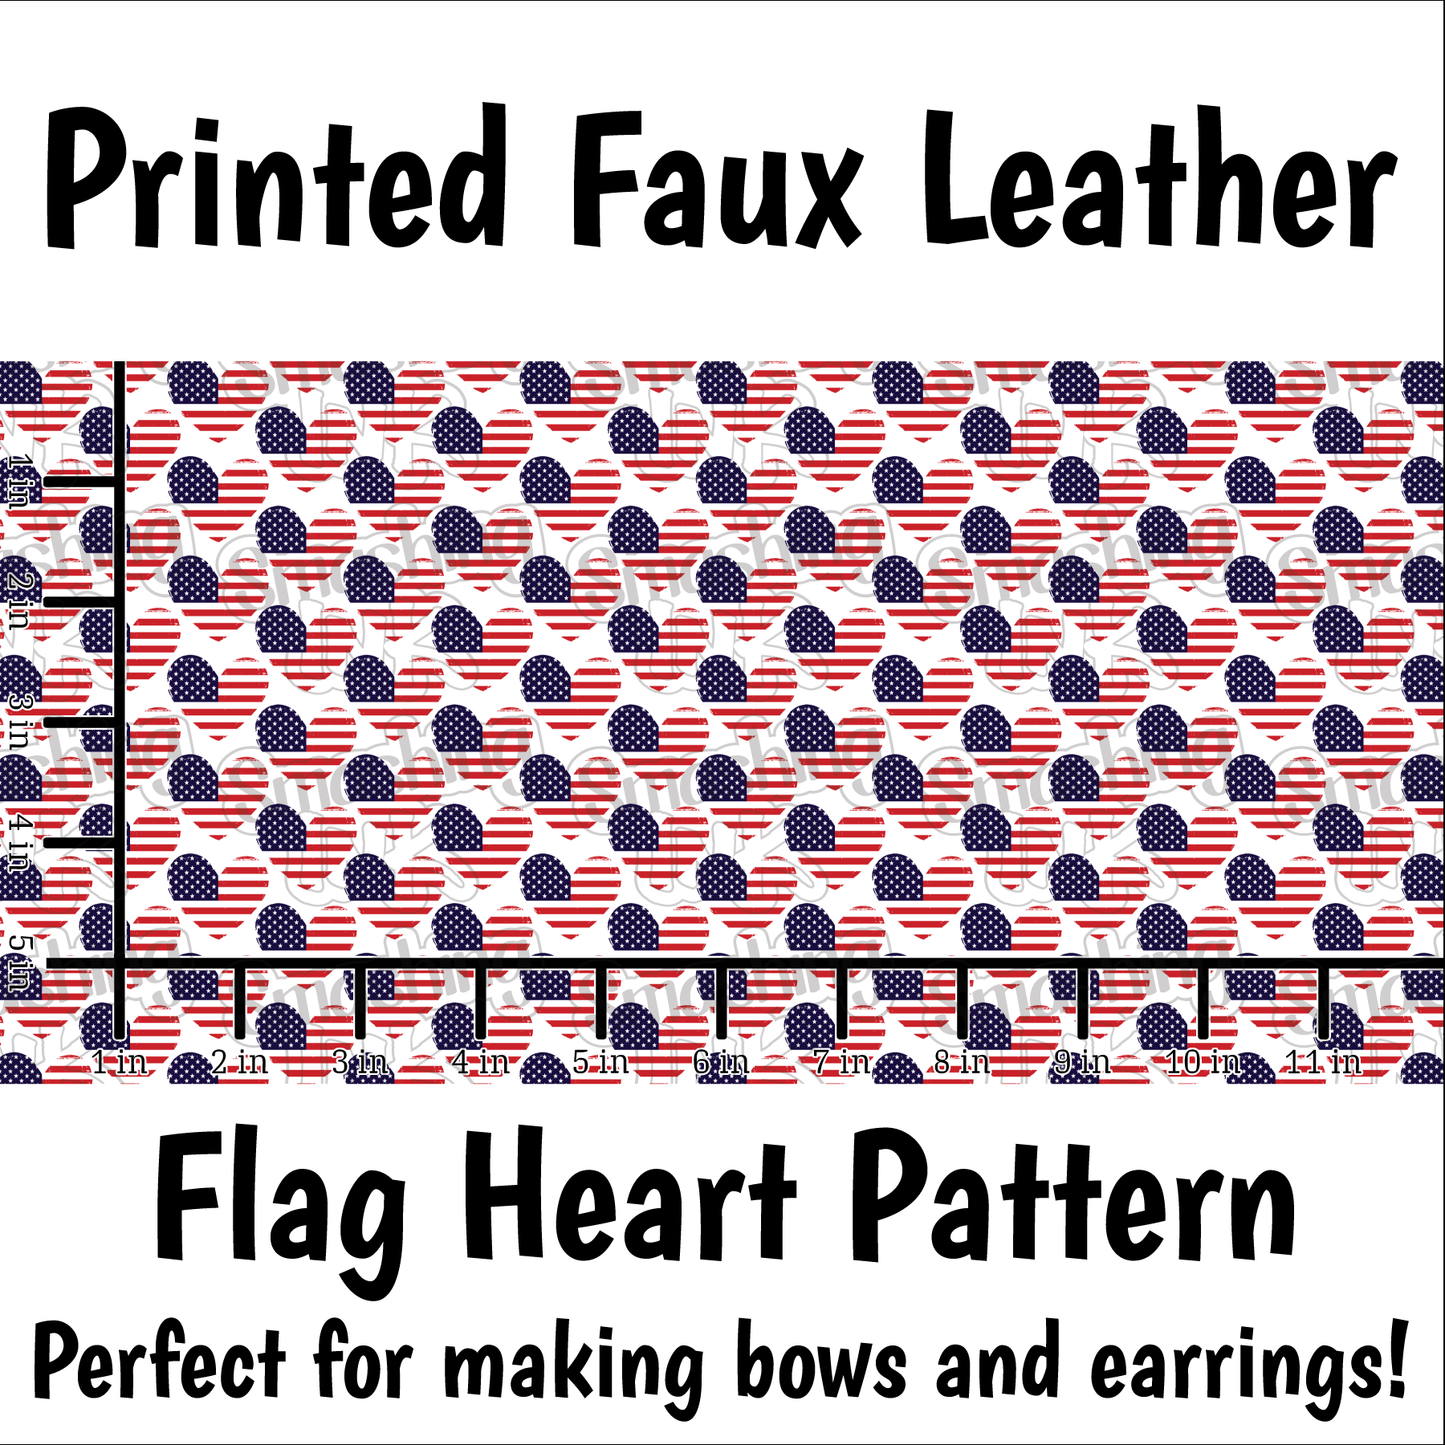 Flag Heart Pattern - Faux Leather Sheet (SHIPS IN 3 BUS DAYS)